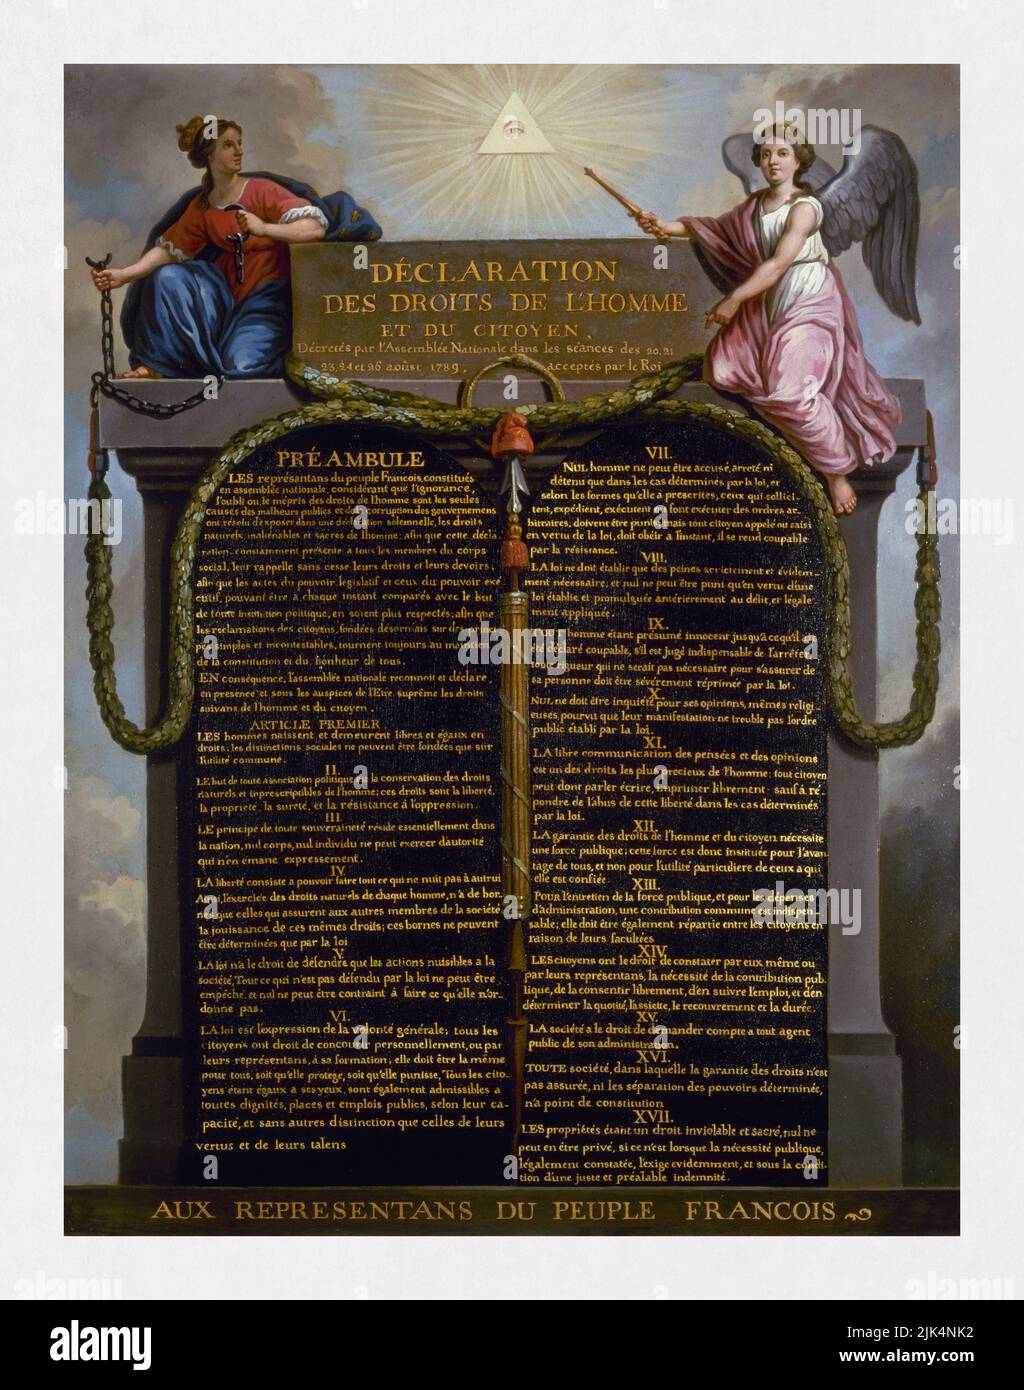 Representation of the Declaration of the Rights of Man and of the Citizen in 1789 by French artist Jean-Jacques Le Barbier. Stock Photo